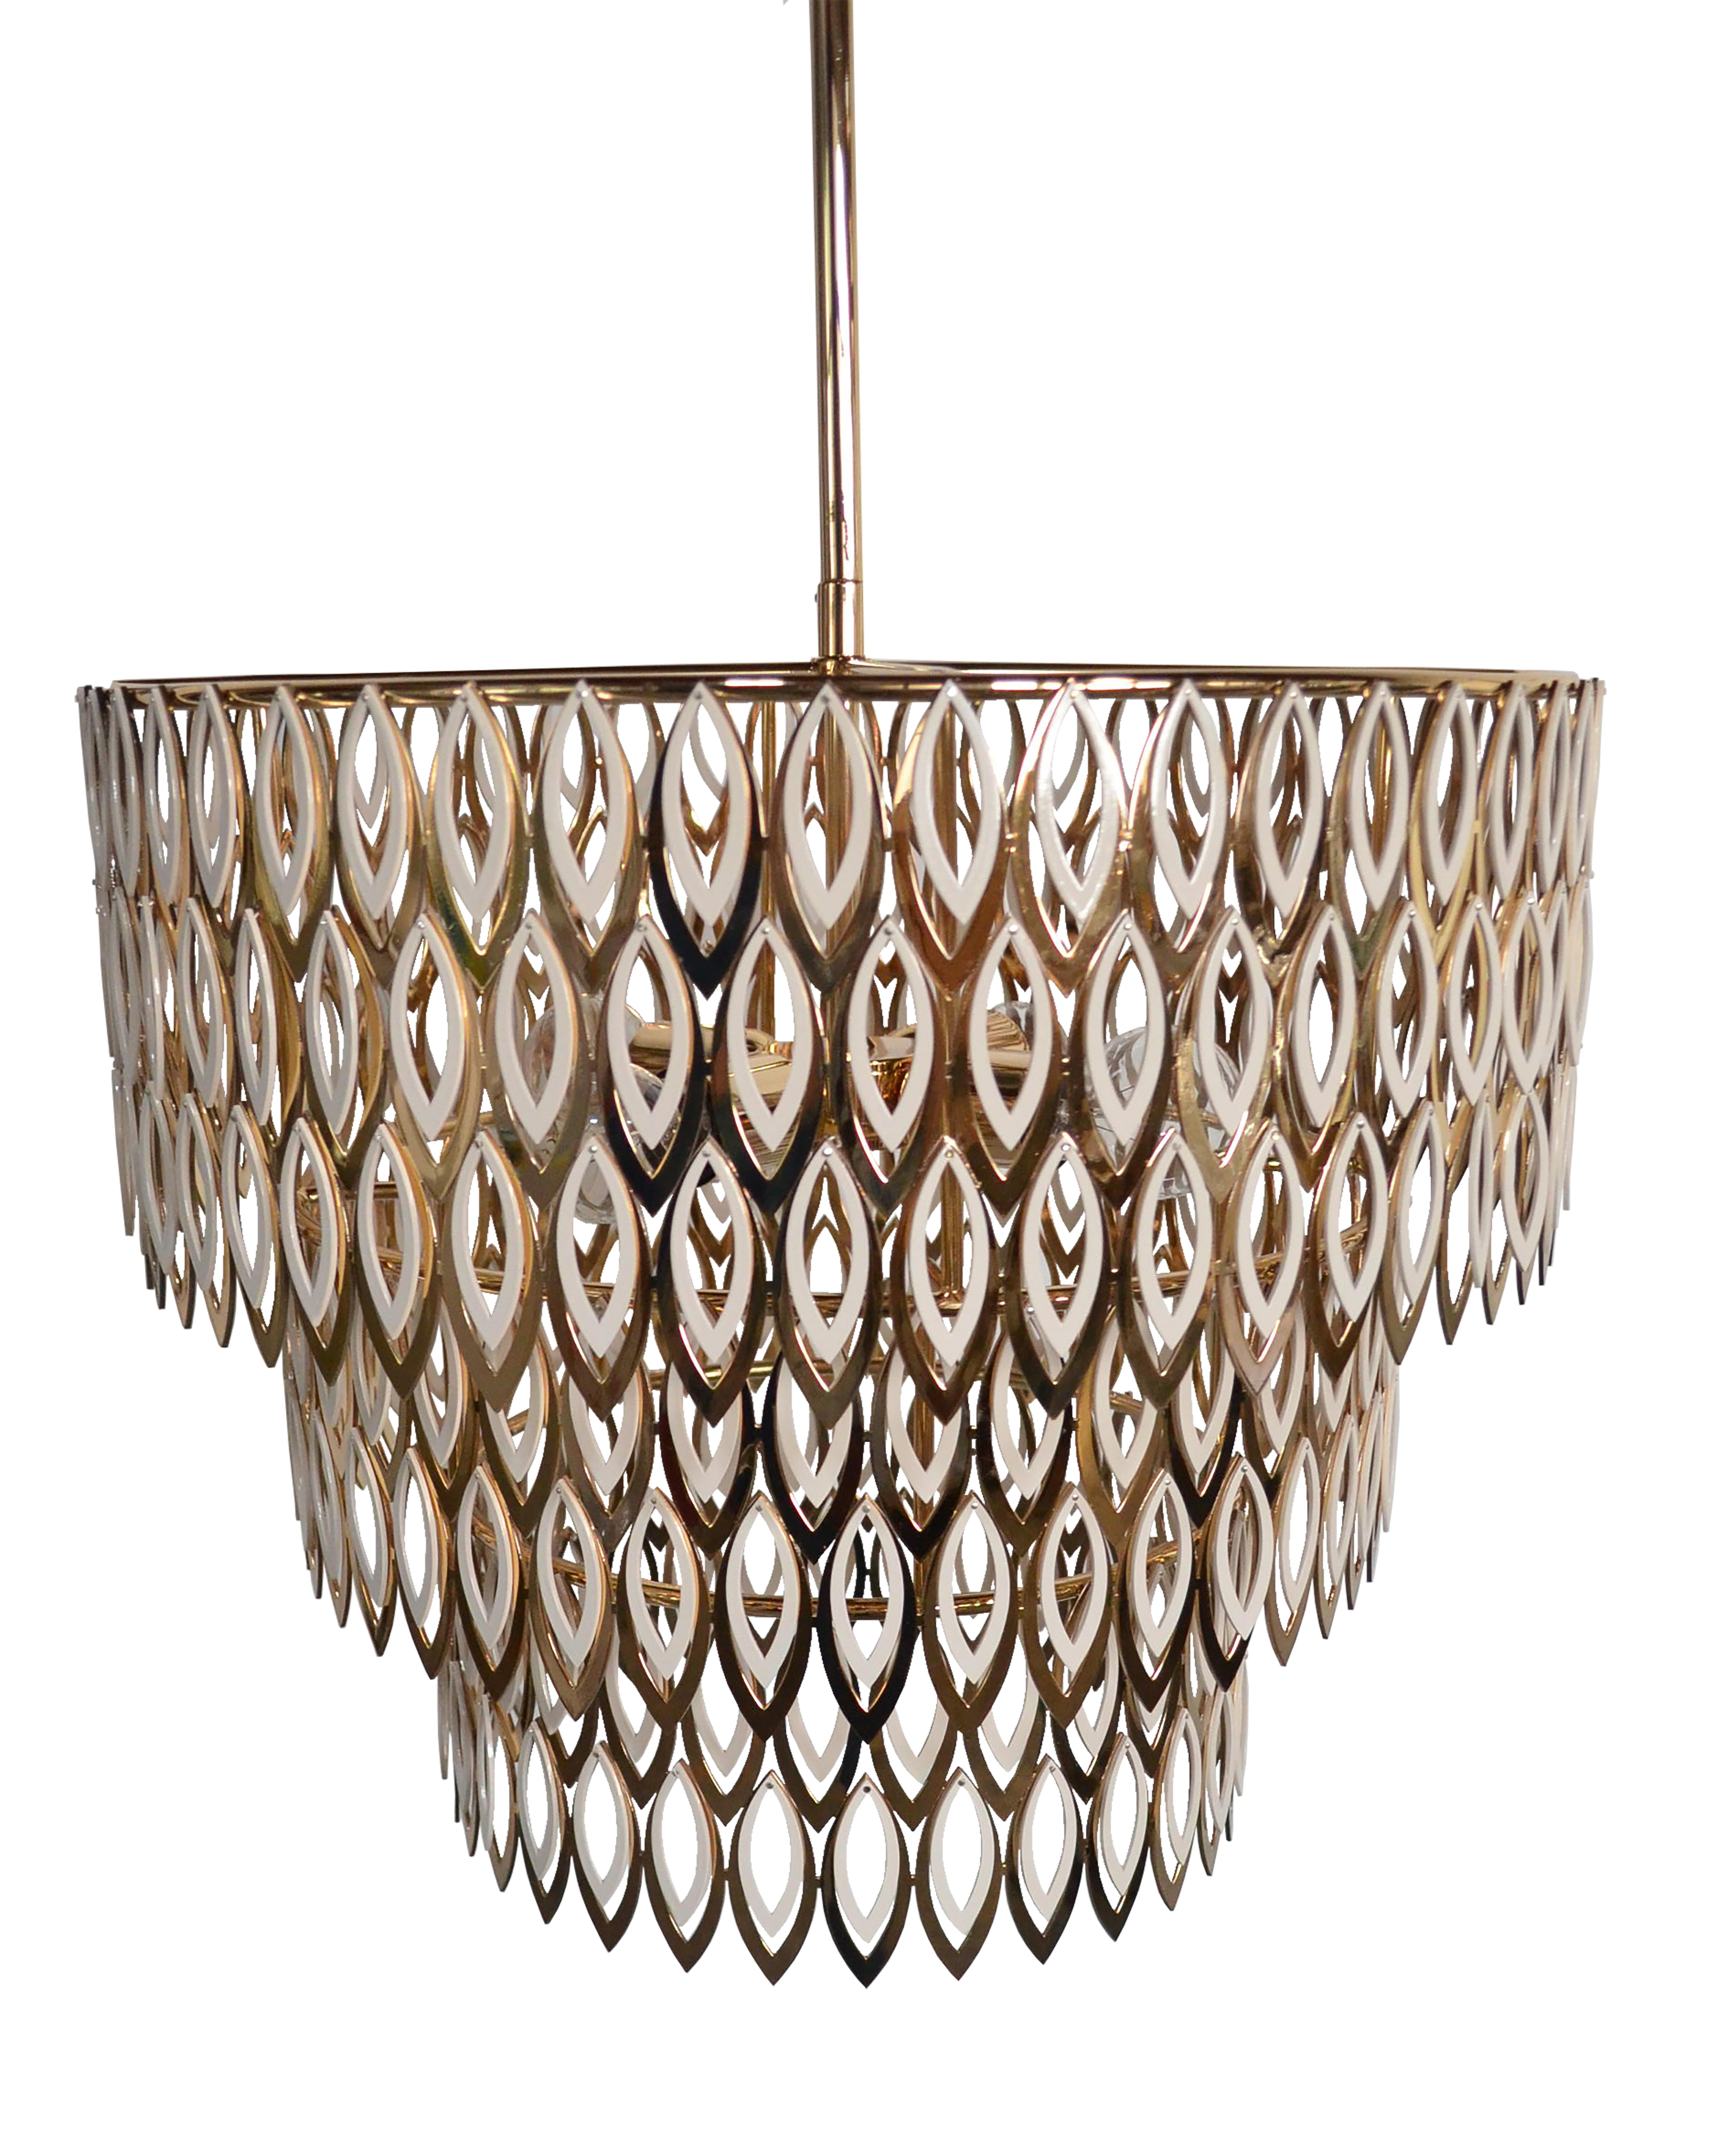 Petal is a modern suspension lamp which brings to any interior design set a luxurious presence. Its 3 imposing tiers of petal-shaped lacquered stainless steel, finished with a rhythmic combination of gold-plated with brass and a lacquer finish over